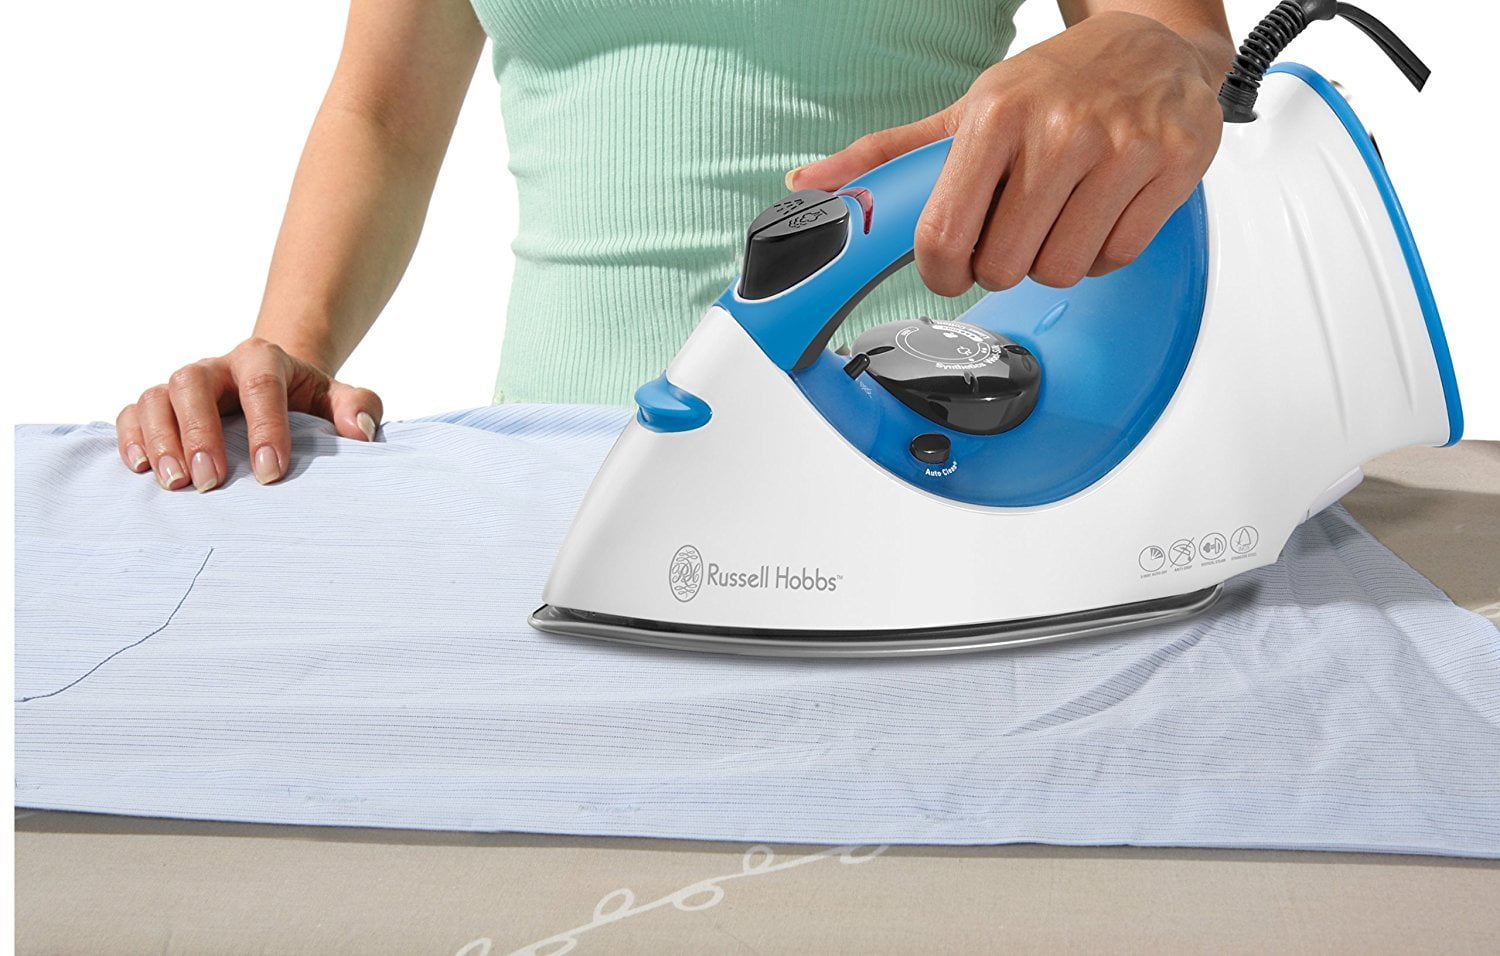 Russell Hobbs Ir5000 Easy Fill Iron With Verticle Steam